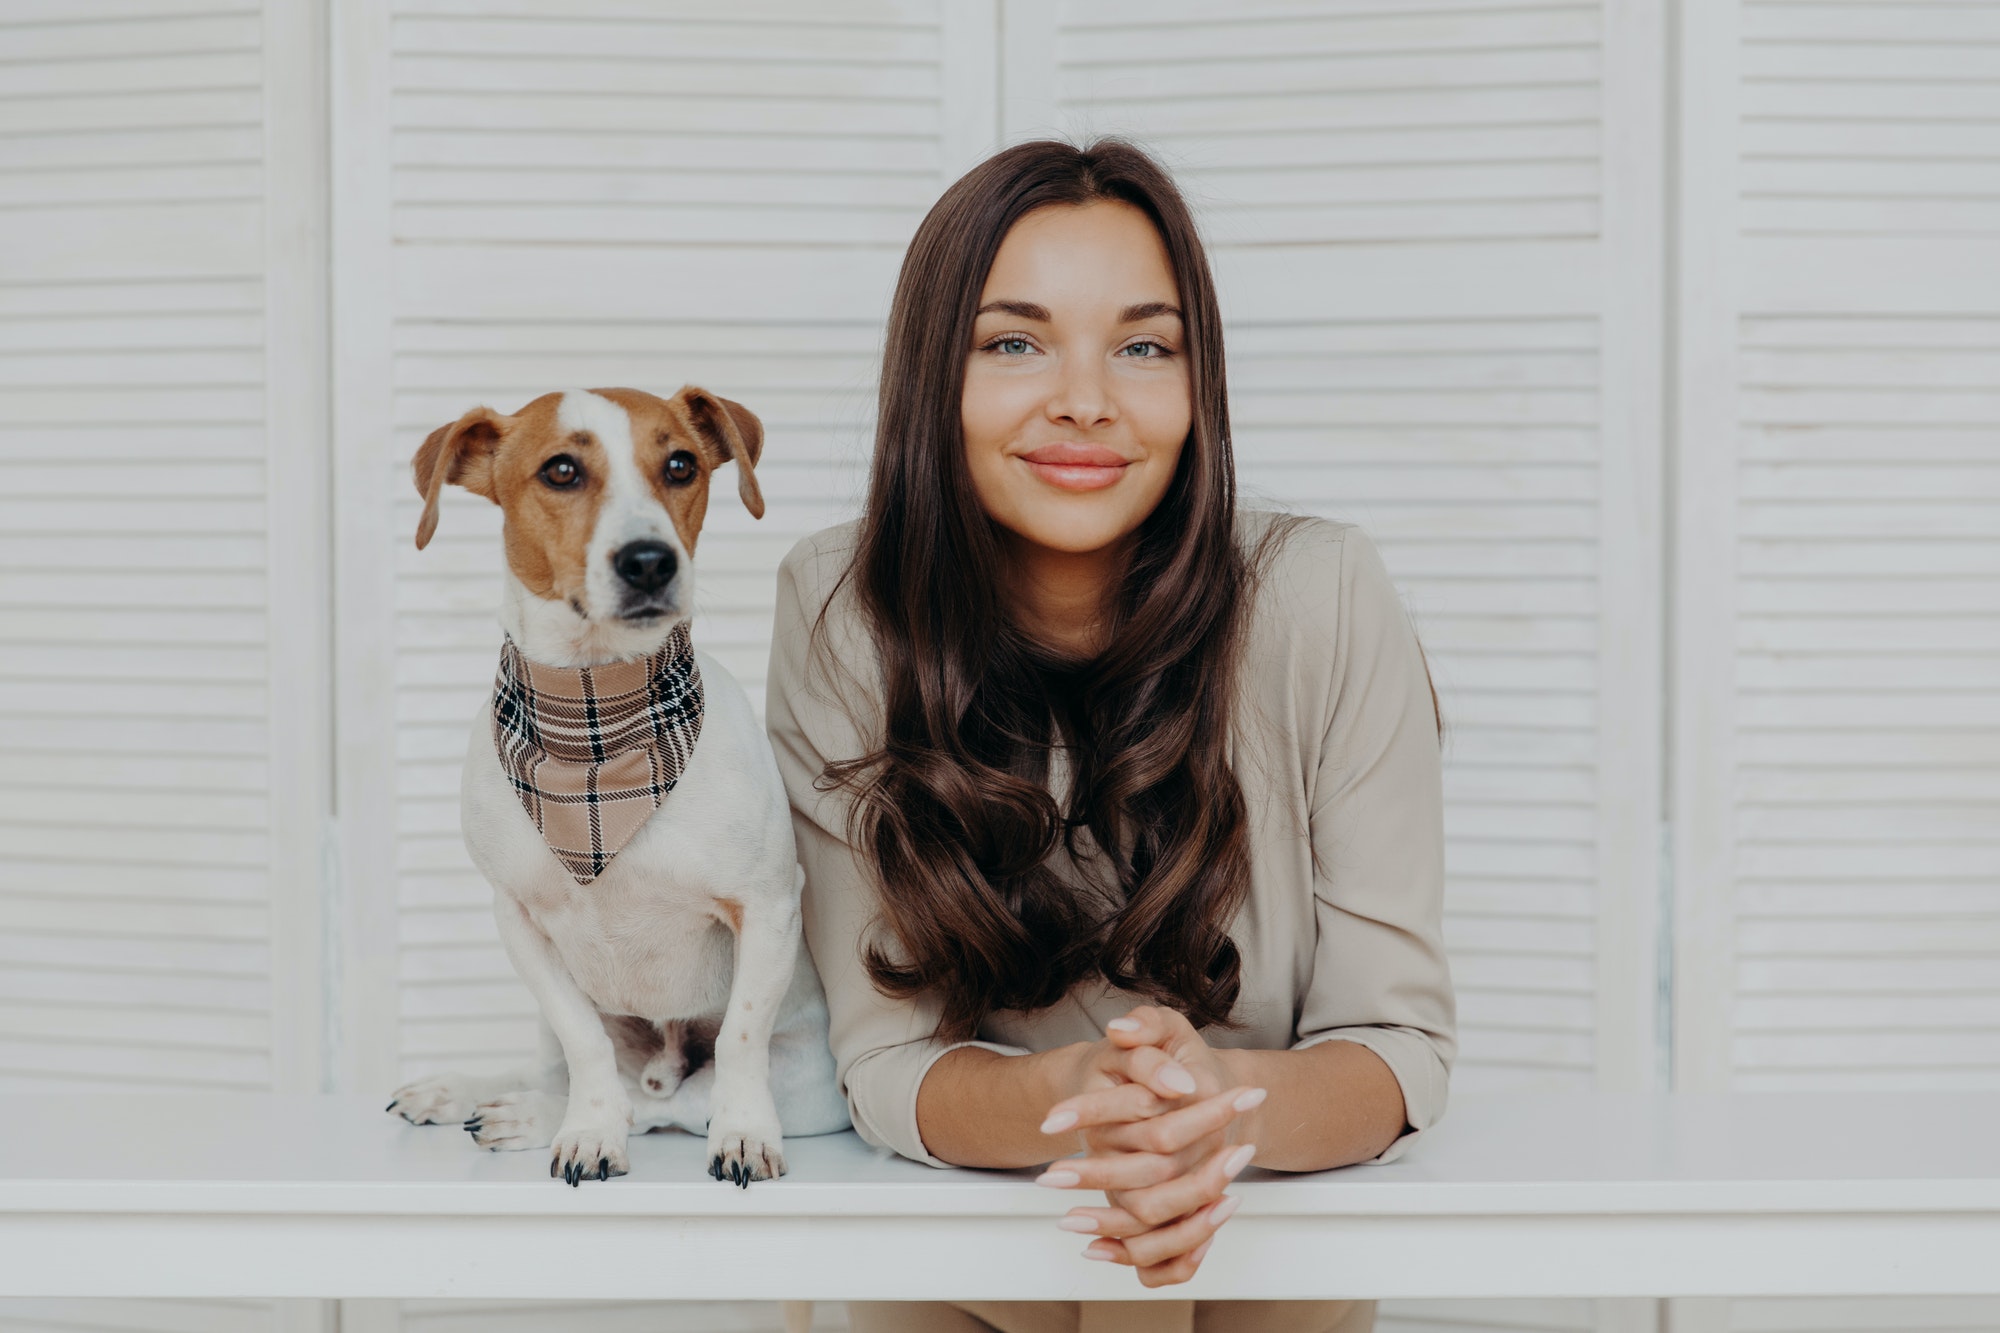 Woman spends leisure time with dog, loves animals, have friendly relationship with pet